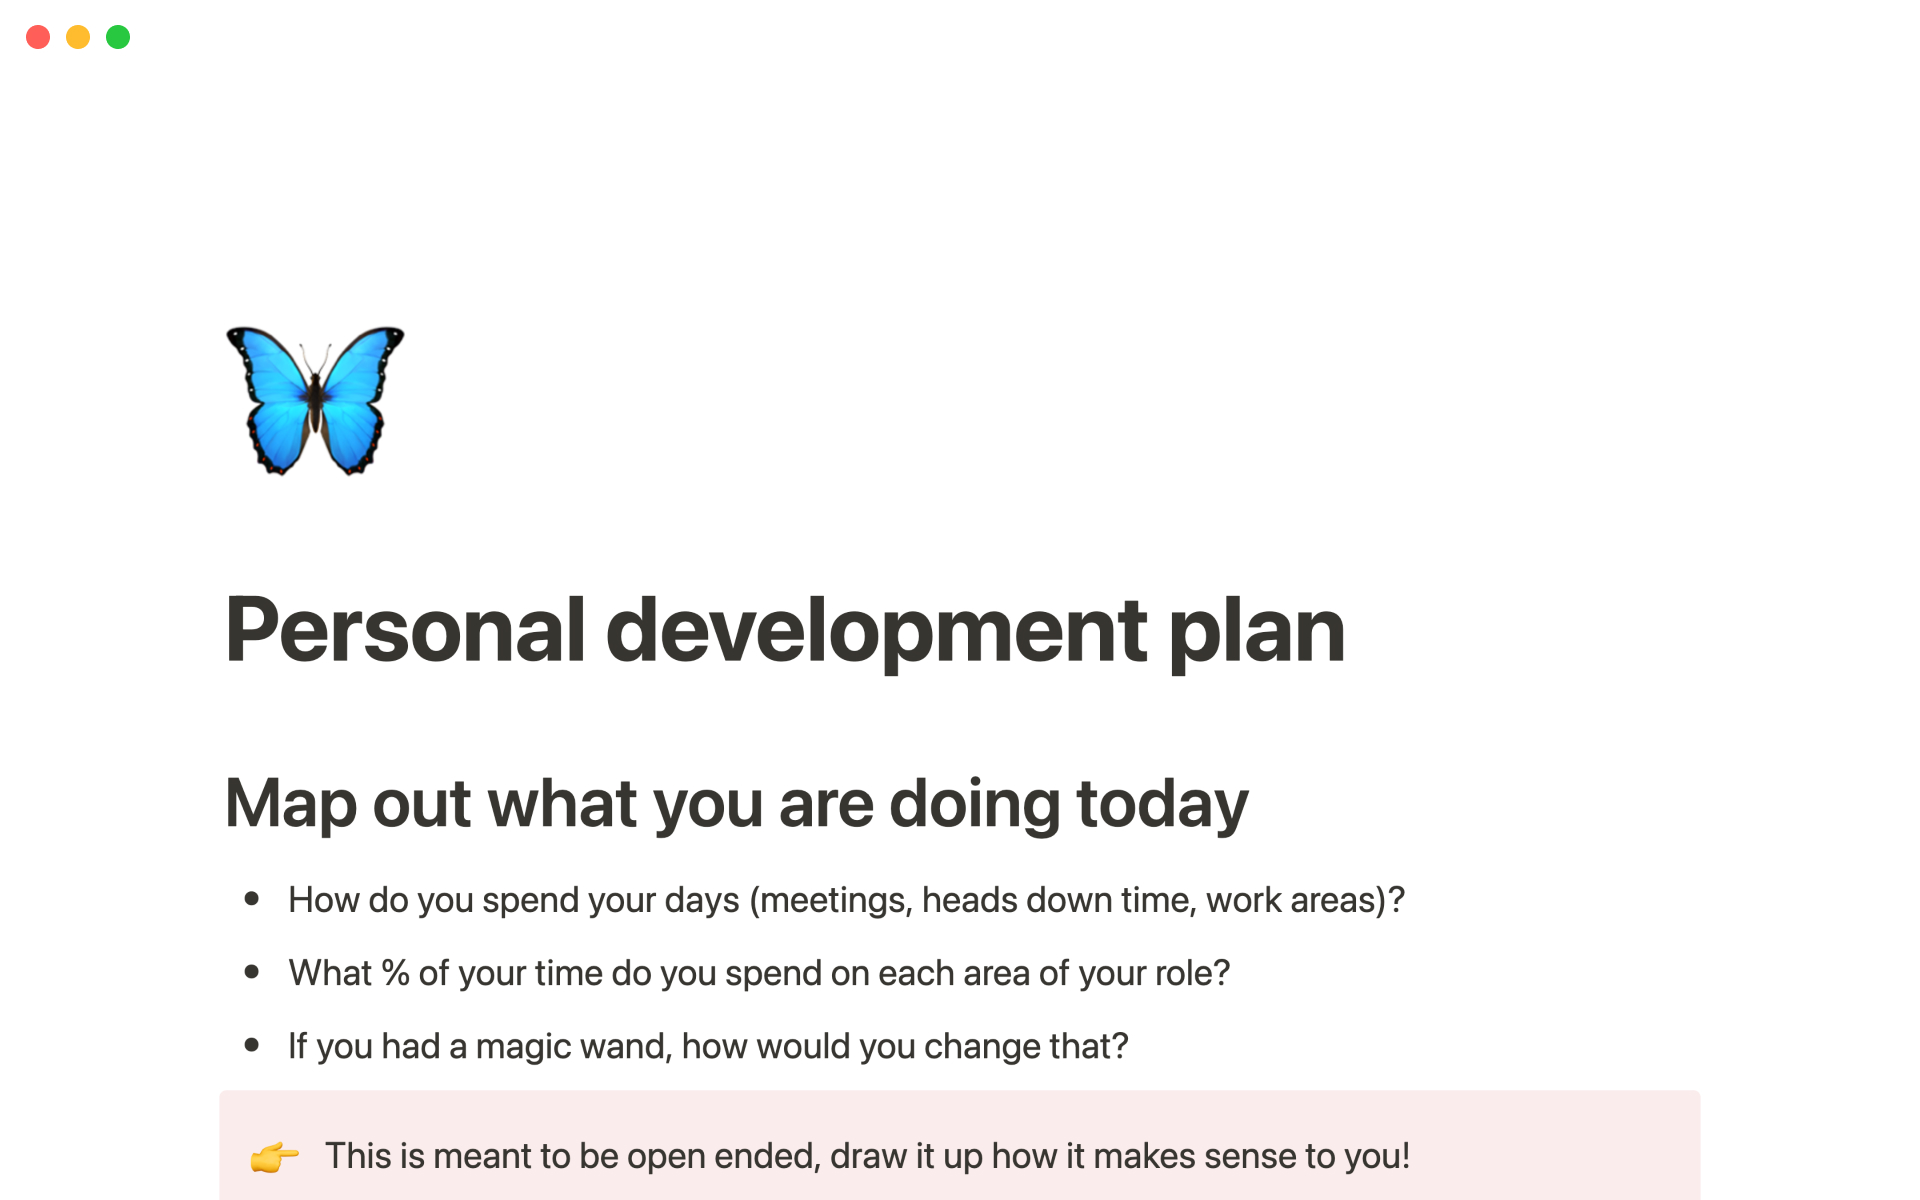 The desktop image for the Personal development plan template